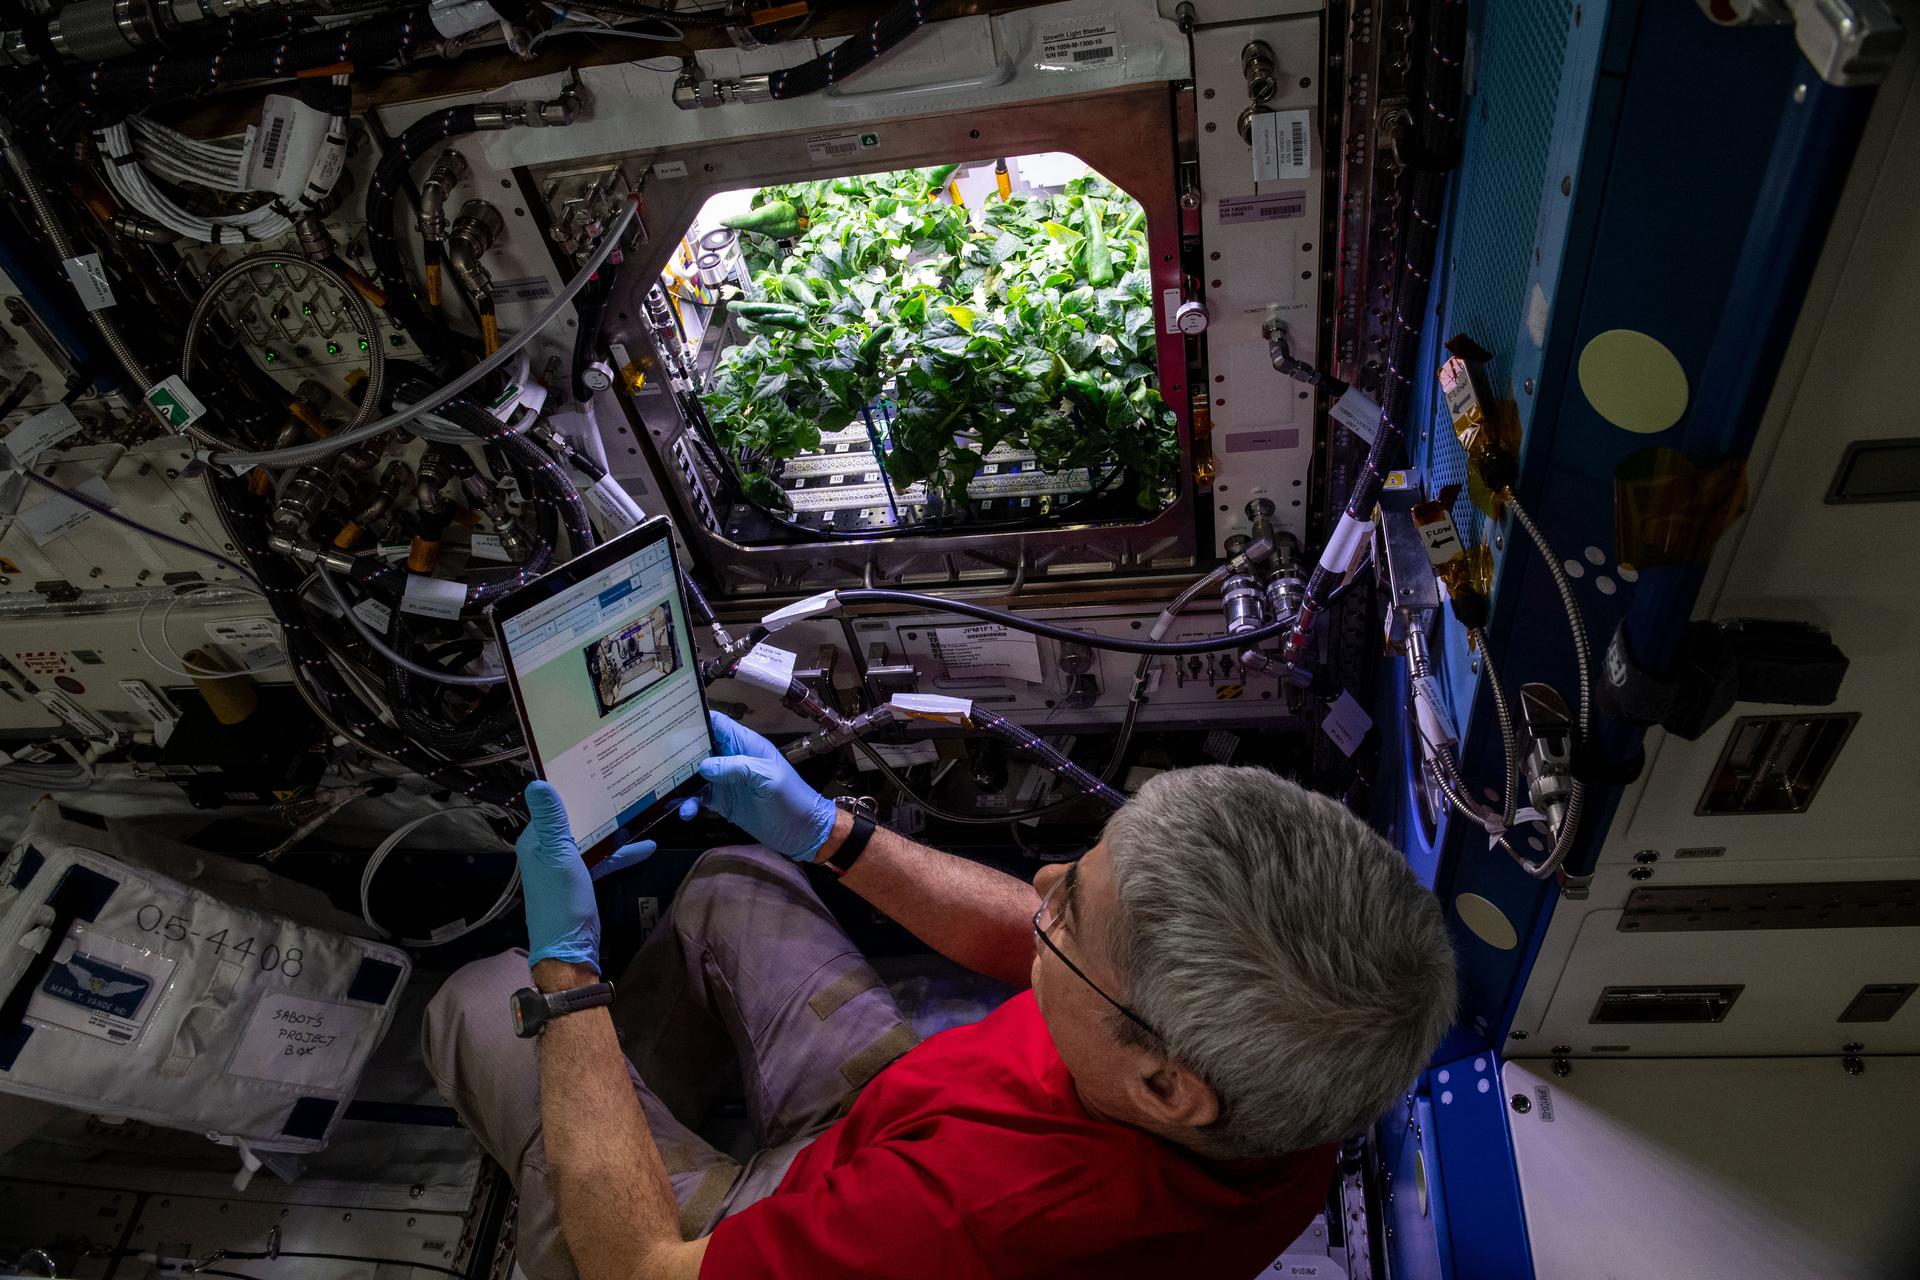 NASA astronaut and Expedition 65 Flight Engineer Mark Vande Hei prepares for the routine debris removal procedure for chile peppers growing in the Advanced Plant Habitat as part of the Plant Habit-04 experiment being conducted aboard the International Space Station. The chile pepper seeds started growing on July 12, 2021, and represent one of the longest and most challenging plant experiments attempted aboard the orbiting laboratory. They will be harvested twice, once in late October and again in late November. Astronauts will sanitize the peppers, eat part of their harvest, and return the rest to Earth for analysis. What we learn will inform future crop growth and food supplementation activities for deep space exploration. Credits: NASA